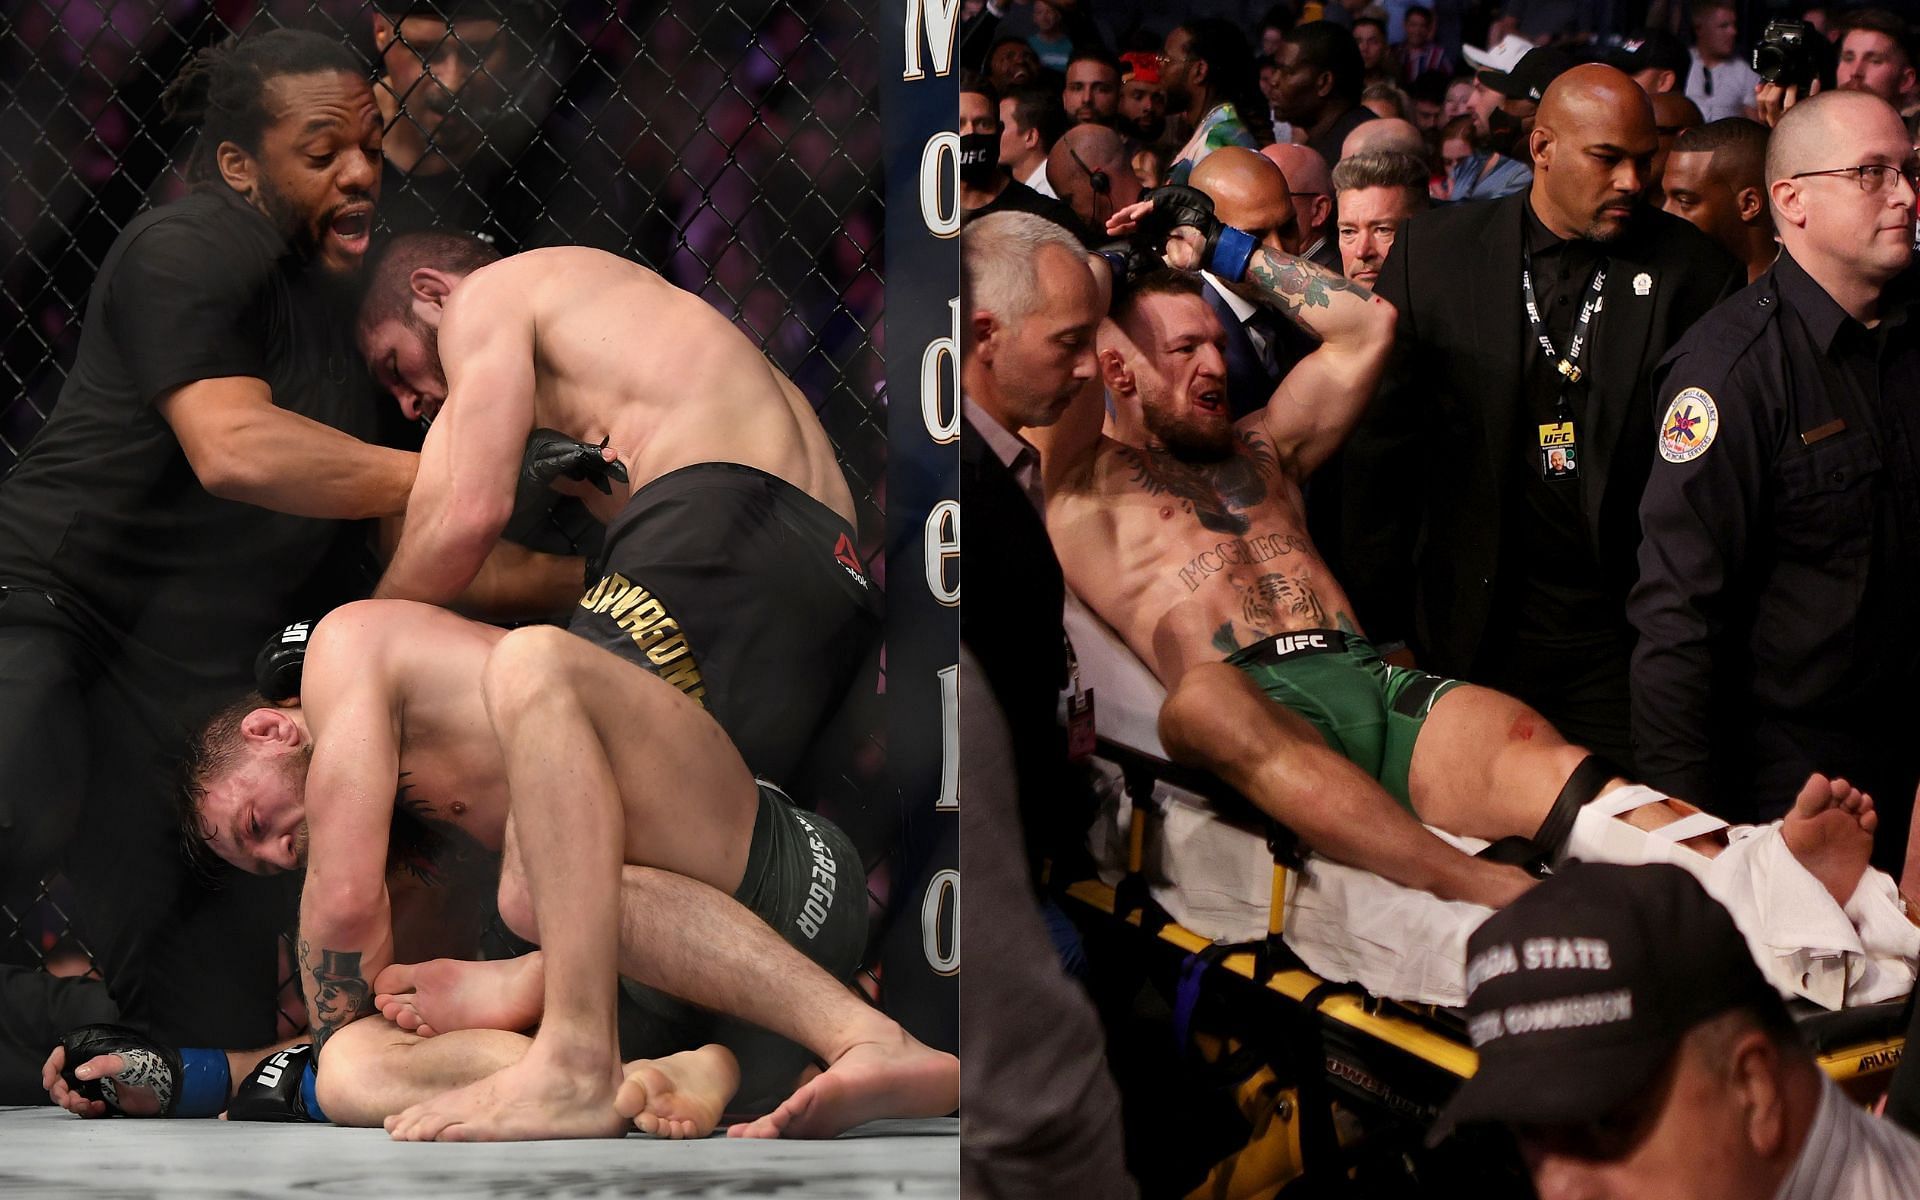 Khabib Nurmagomedov choking out Conor McGregor (left) and Conor McGregor following his loss to Dustin Poirier (right) (Image credits Getty Images)